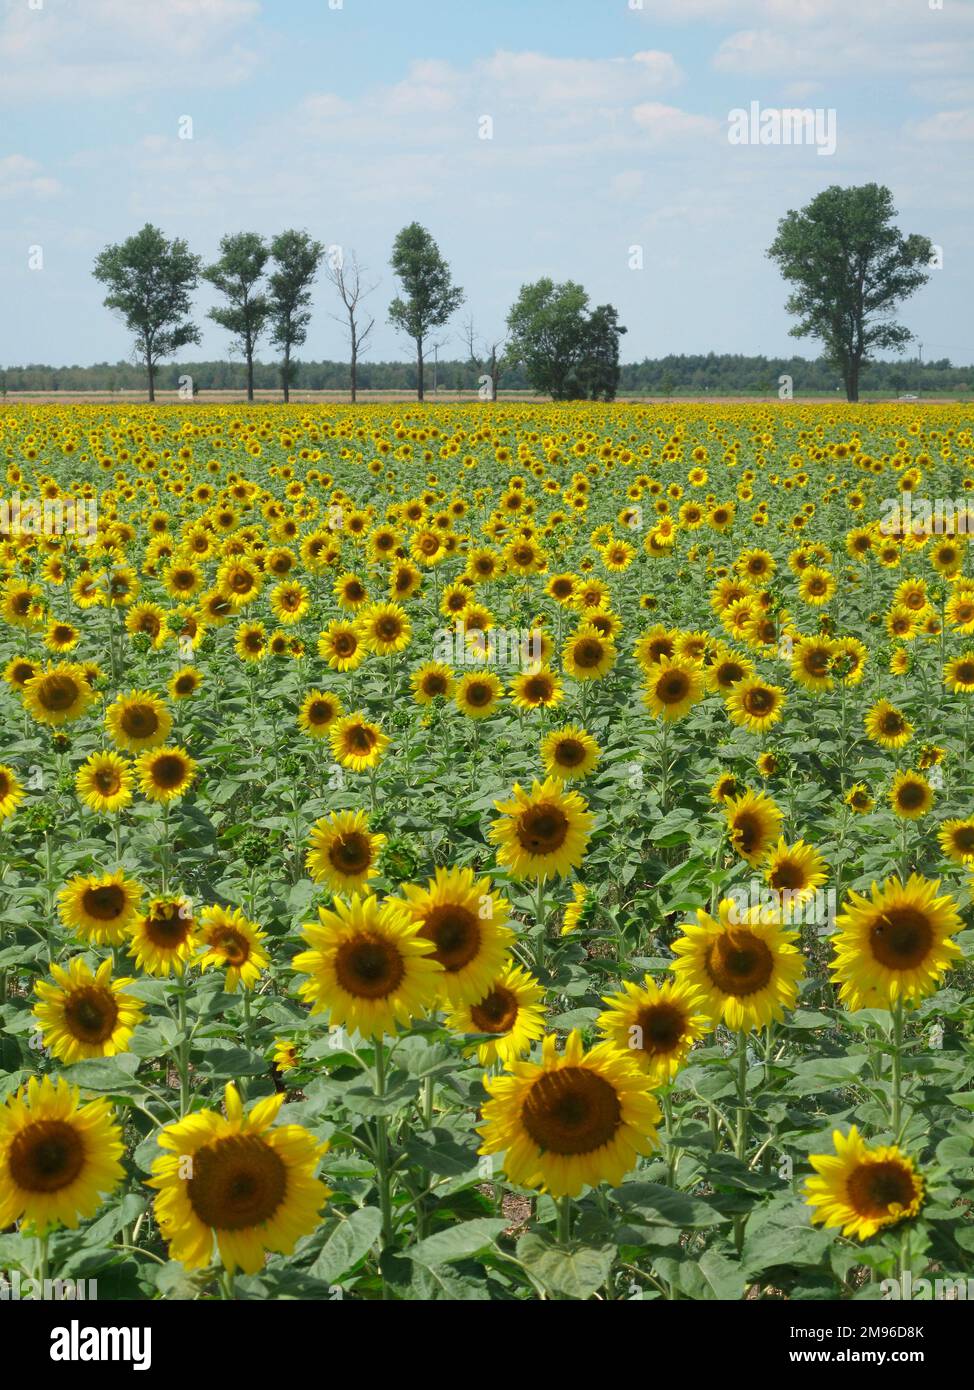 View across a sunflower field near the town of Riesa in the state of Saxony, Germany. Stock Photo